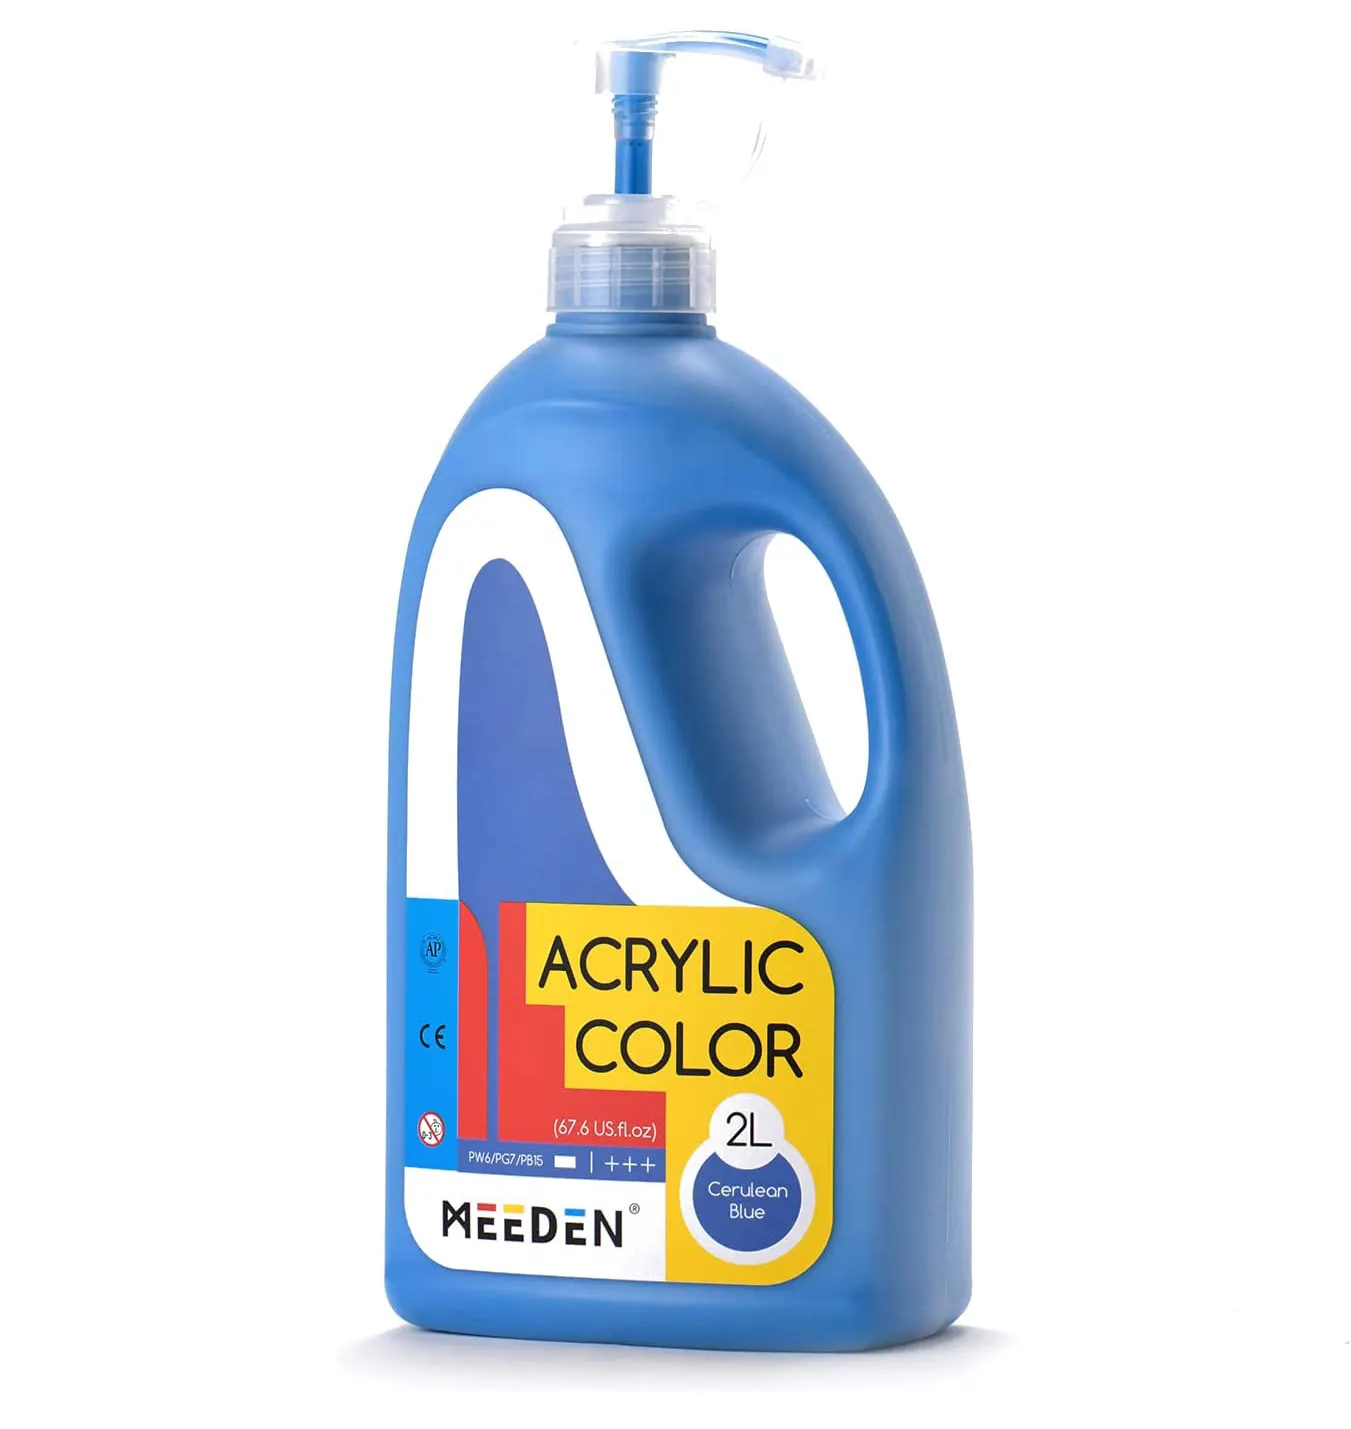 MEEDEN Heavy-Body Non-Toxic Rich Pigment Color Cerulean Blue Acrylic Paint with Pump Lid for Art Class, Wall Painting